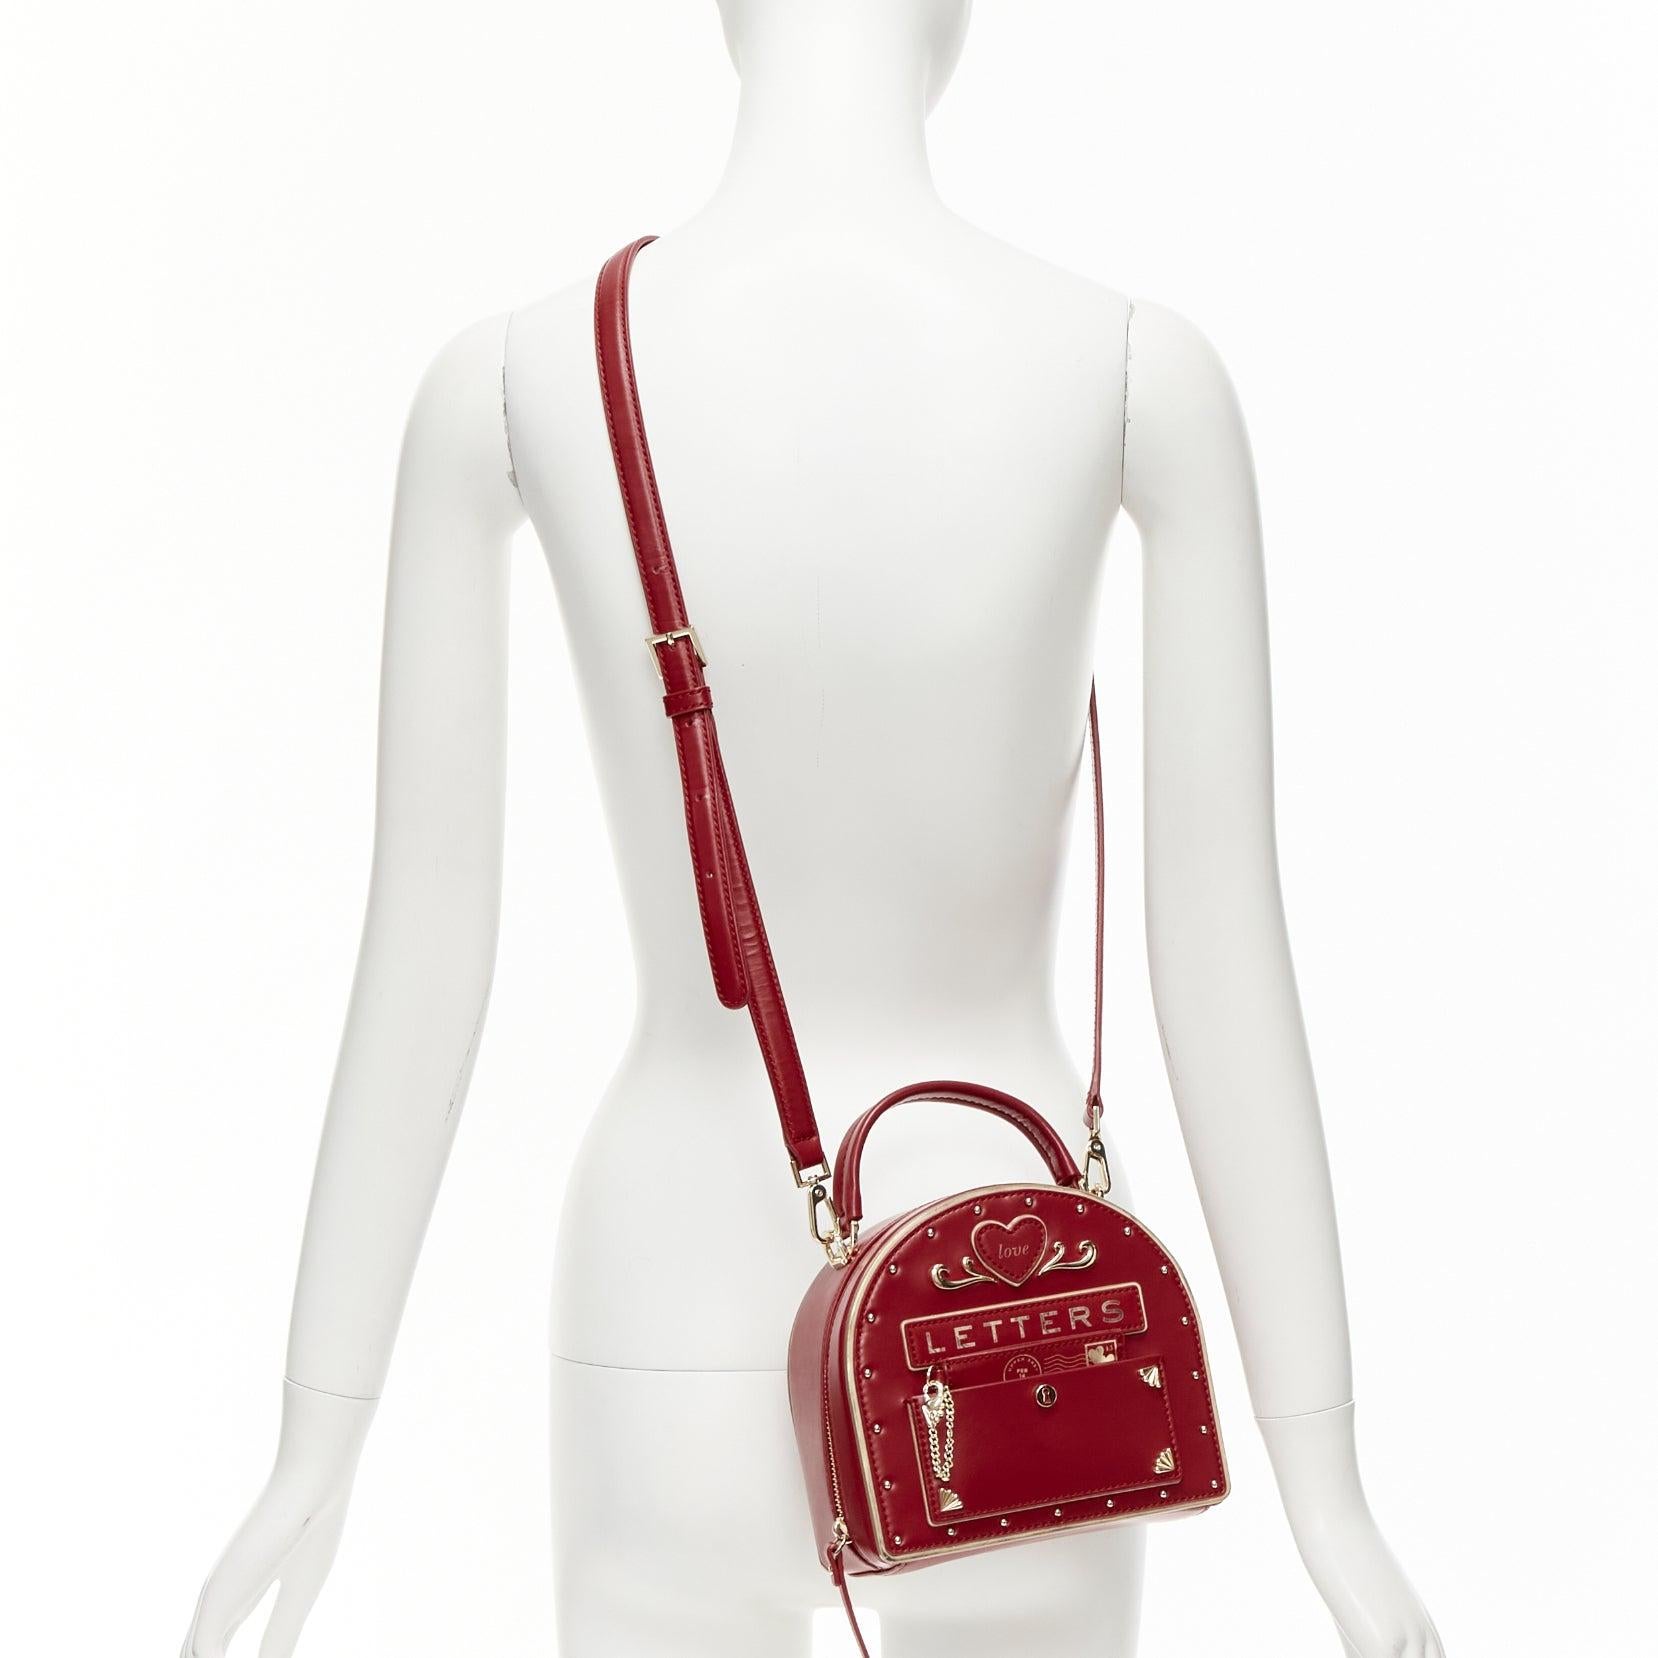 KATE SPADE Yours Truly red gold piping love letter mailbox crossbody vanity bag
Reference: TGAS/D01106
Brand: Kate Spade
Model: Yours Truly
Material: Leather
Color: Gold, Red
Pattern: Solid
Closure: Zip
Lining: Multicolour Fabric
Extra Details: